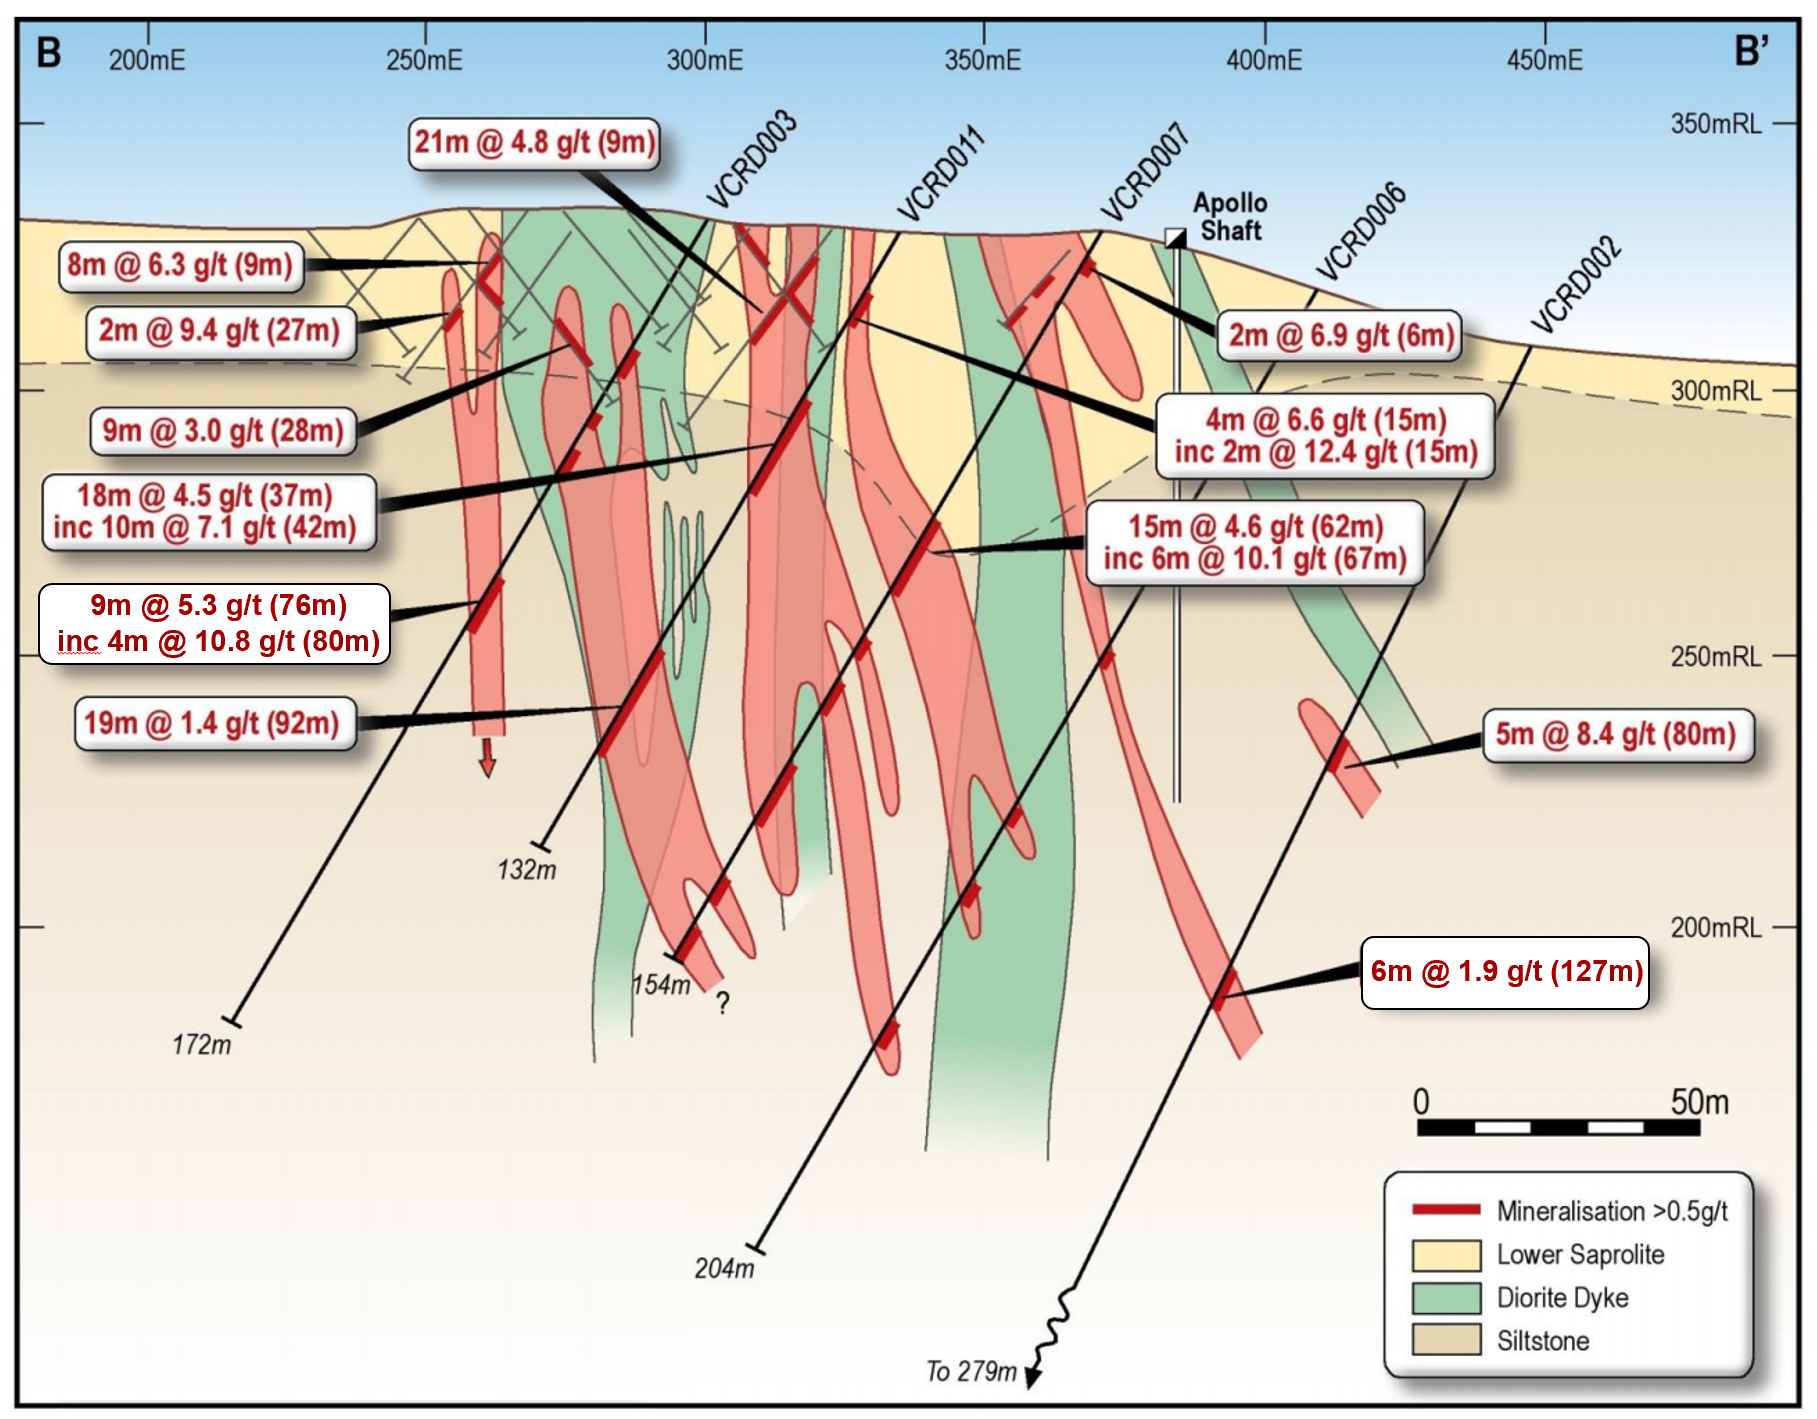 Mawson Resources Limited, Monday, March 23, 2020, Press release picture